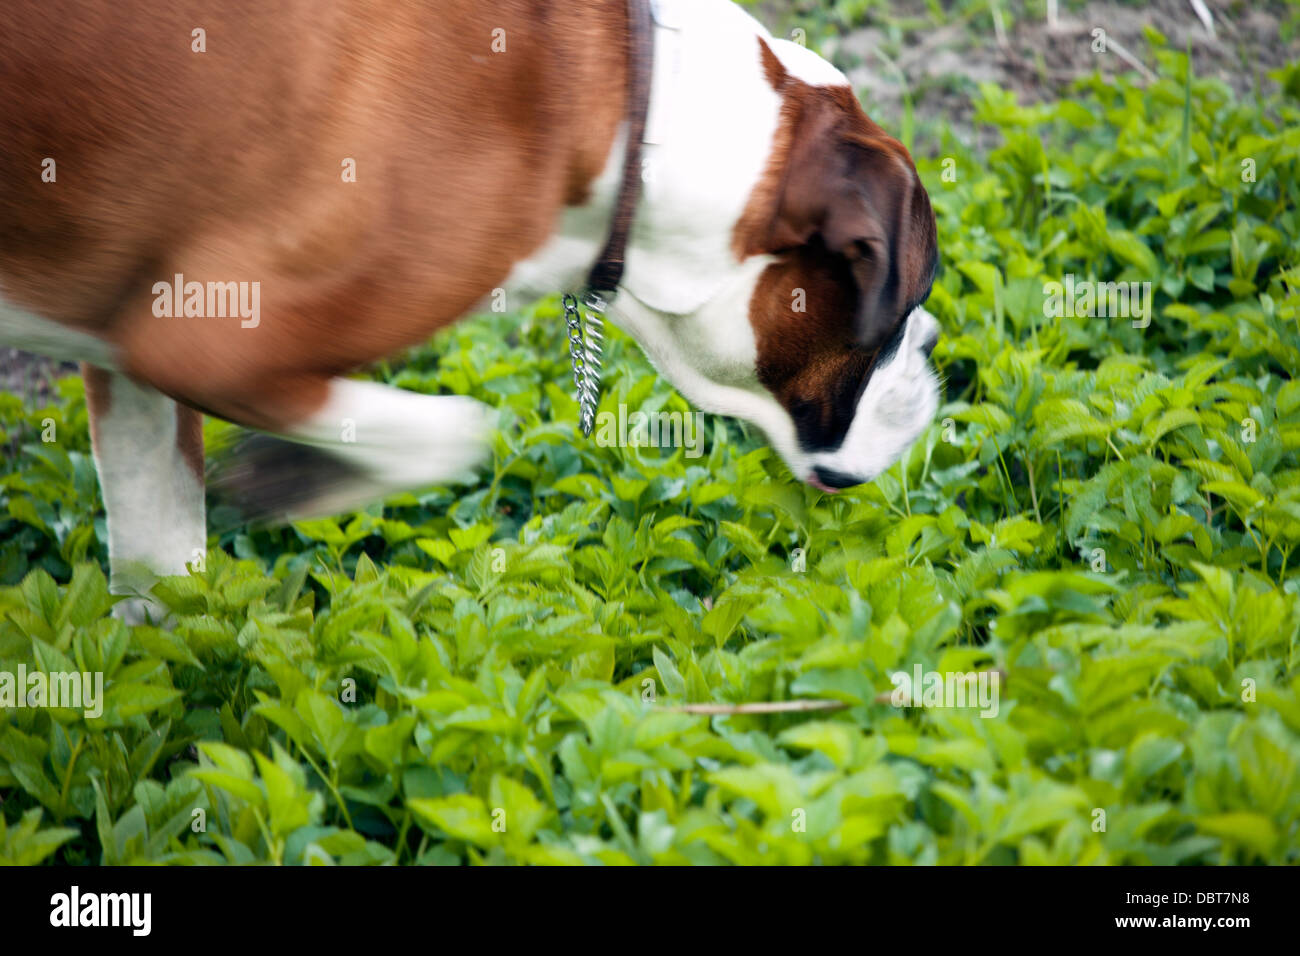 Dog smelling green plants Stock Photo